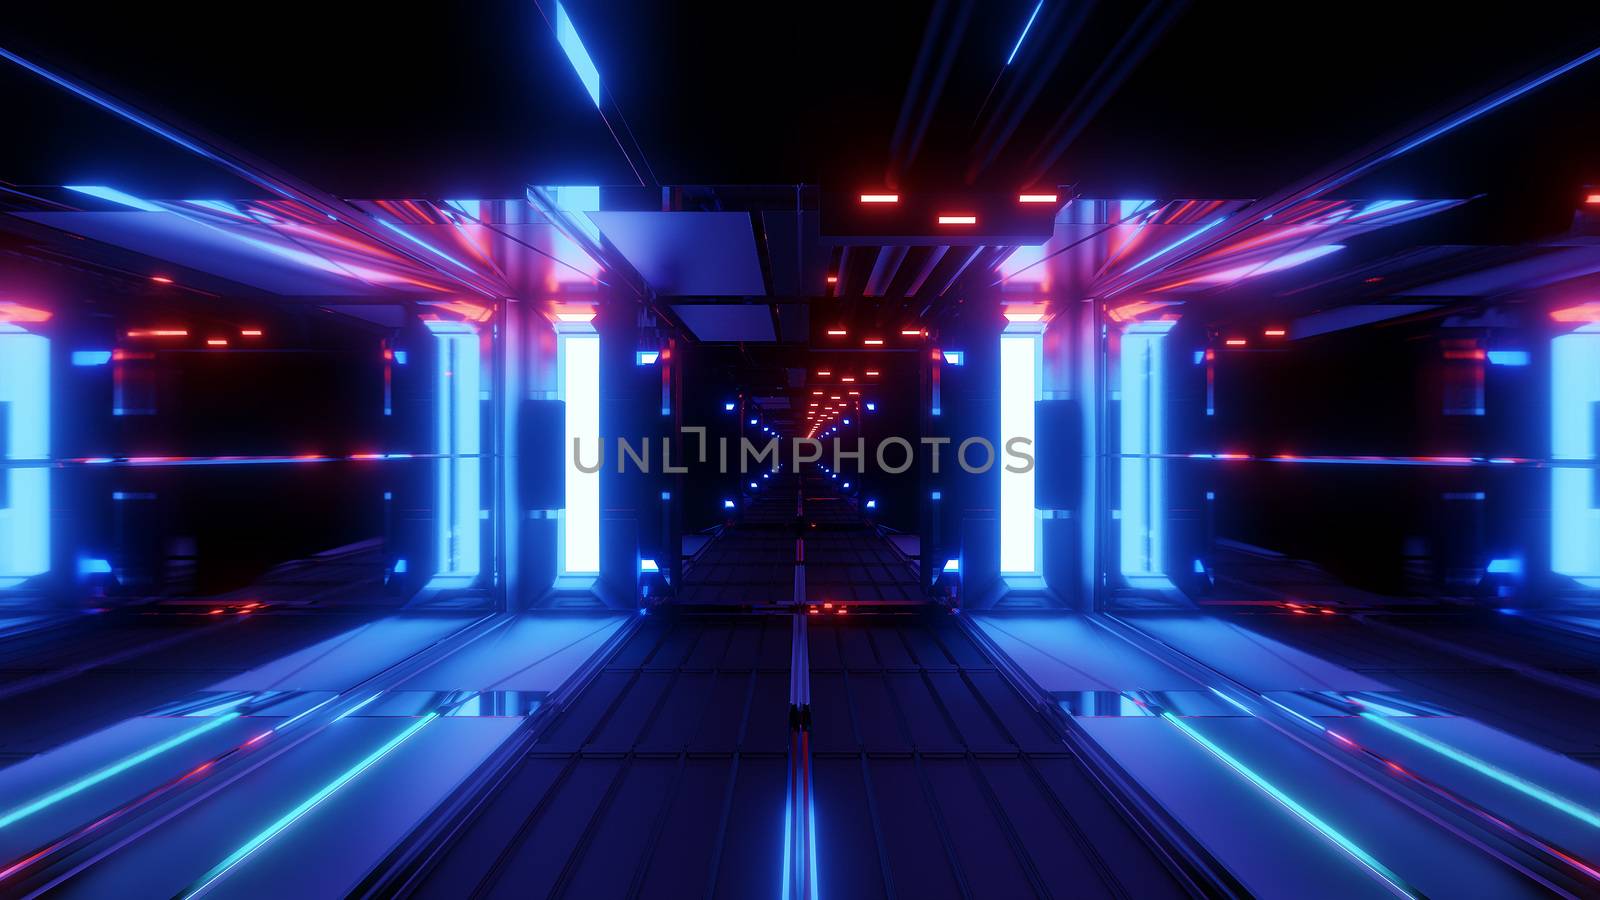 nice glowing space tunnel background wallpaper 3d rendering by tunnelmotions